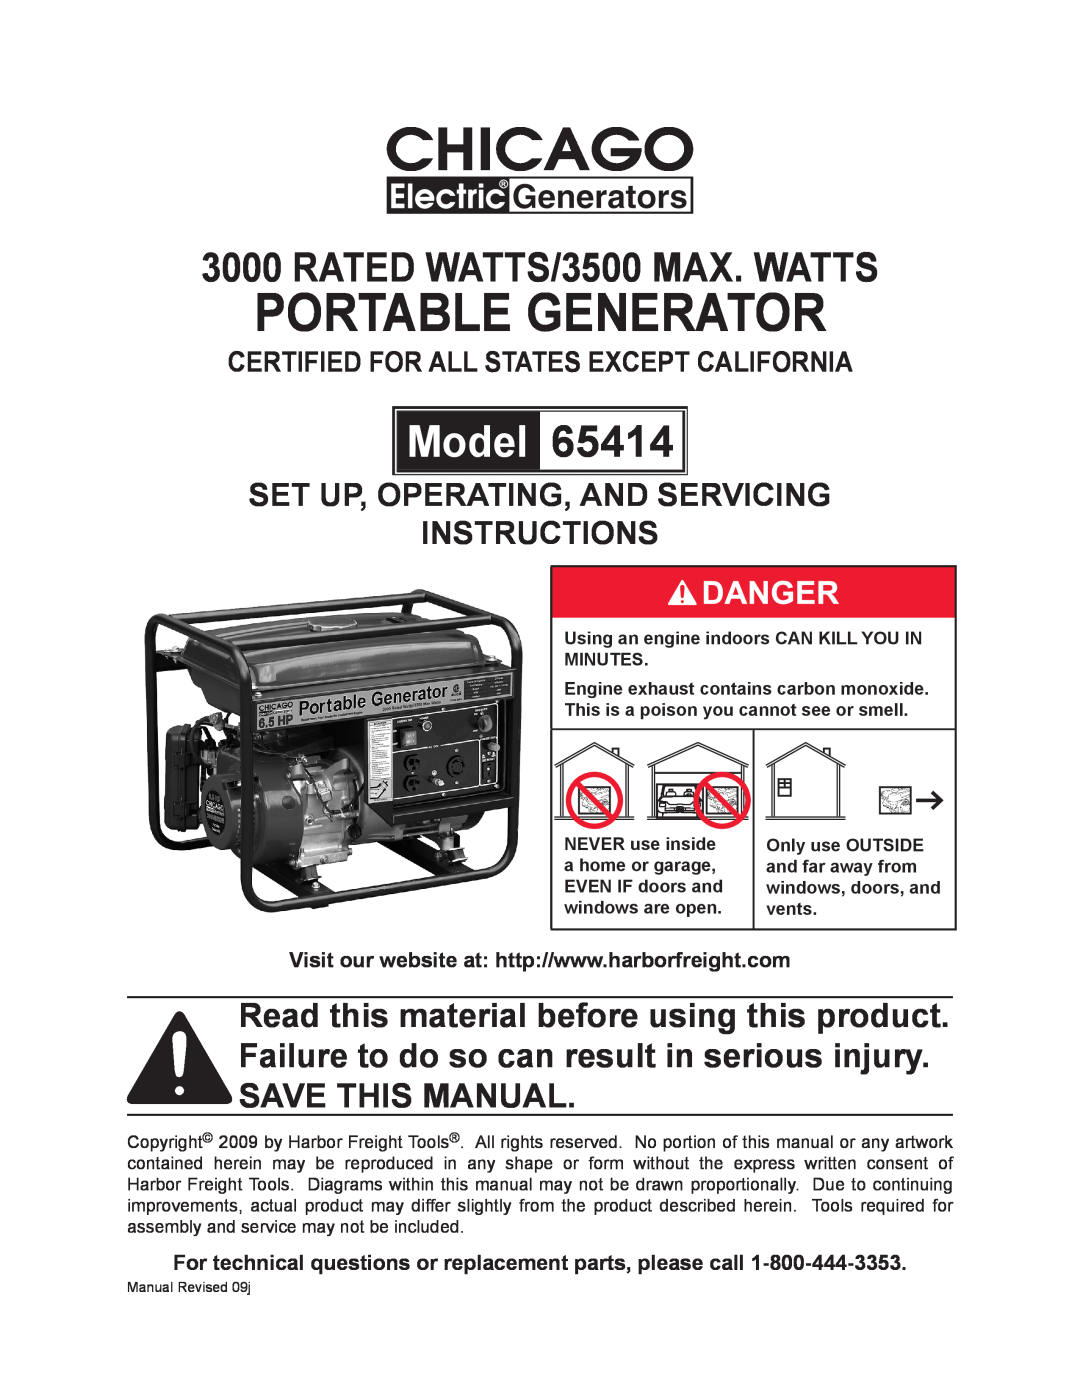 Chicago Electric 65414 manual certified for all states except california, portable generator, Model 